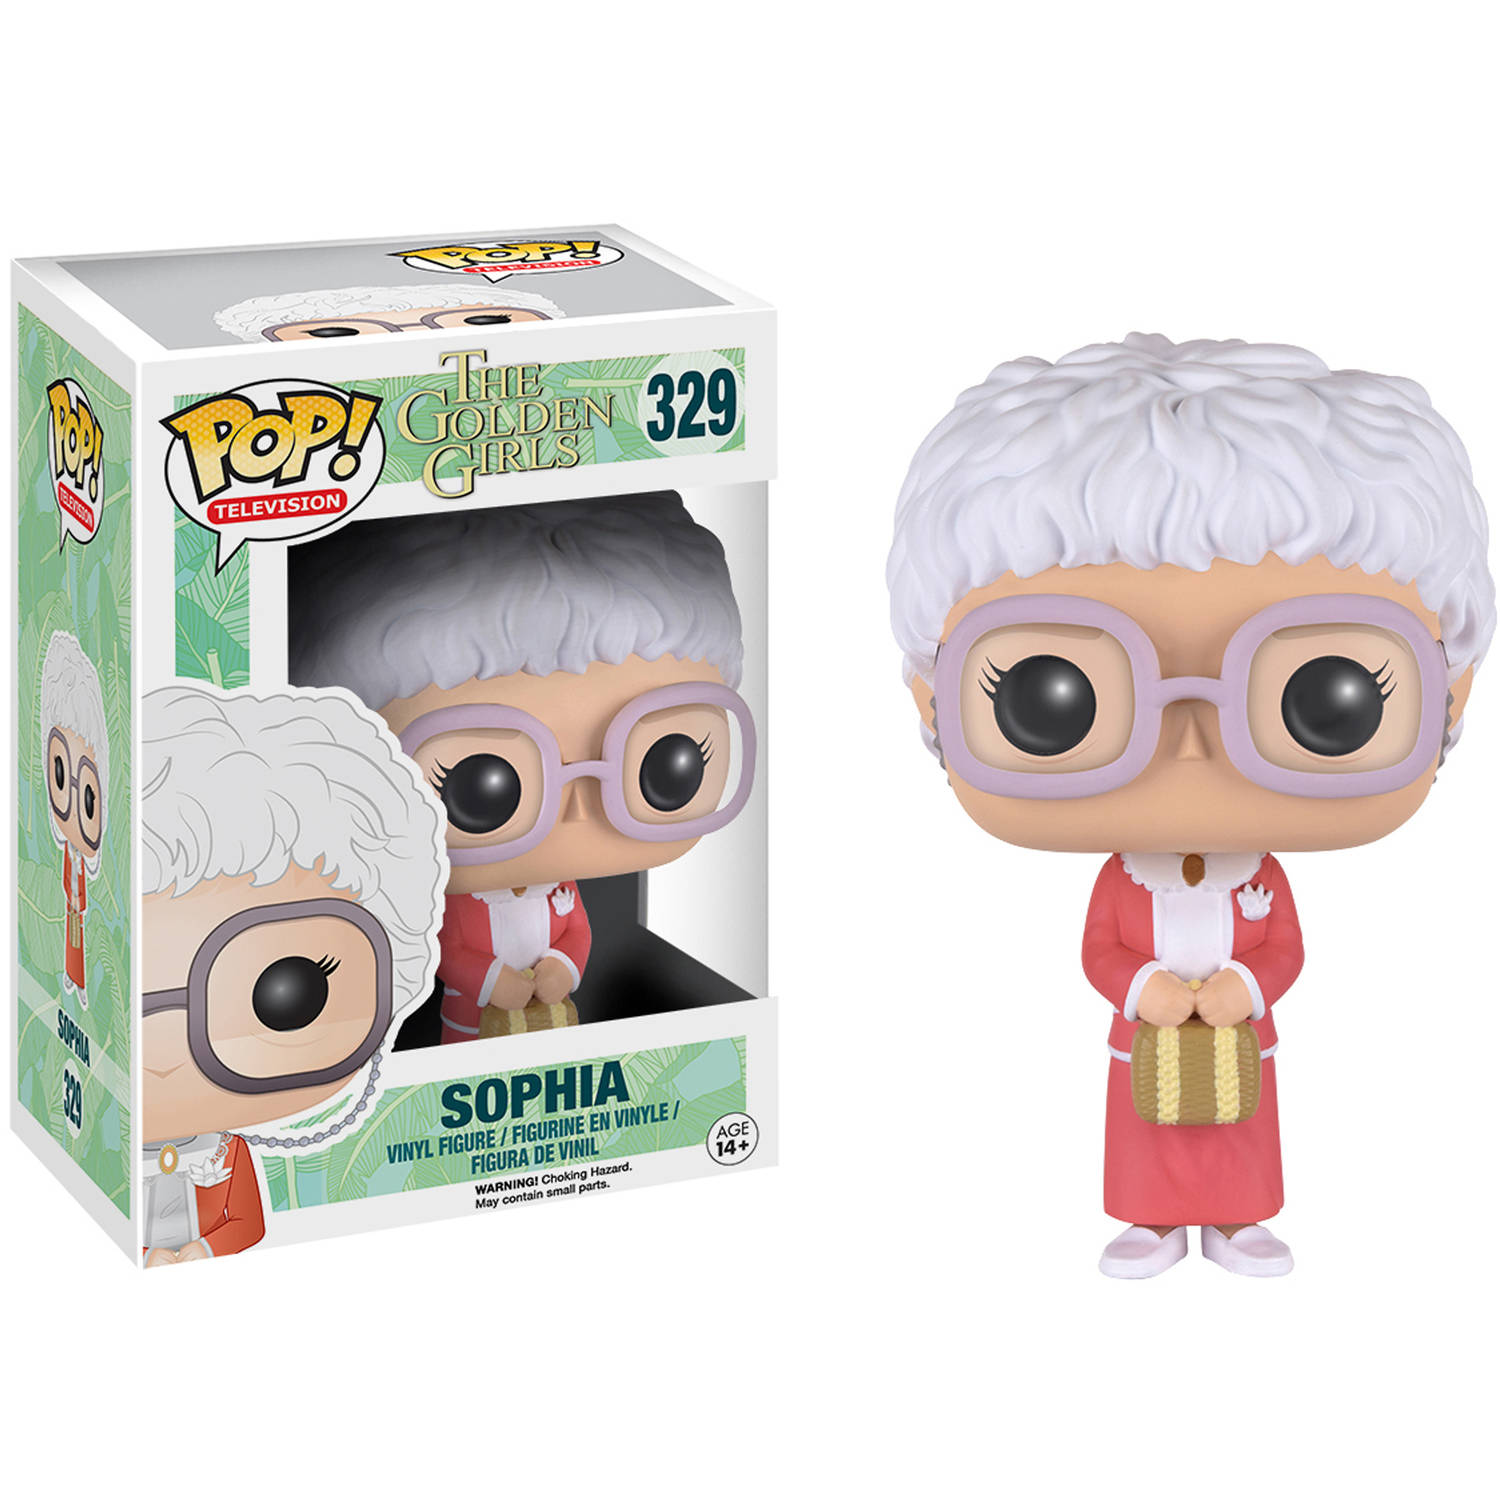 Funko POP! Golden Girls TV Collectors Set Featuring Sophia, Rose, Blanche and Dorothy - image 4 of 5